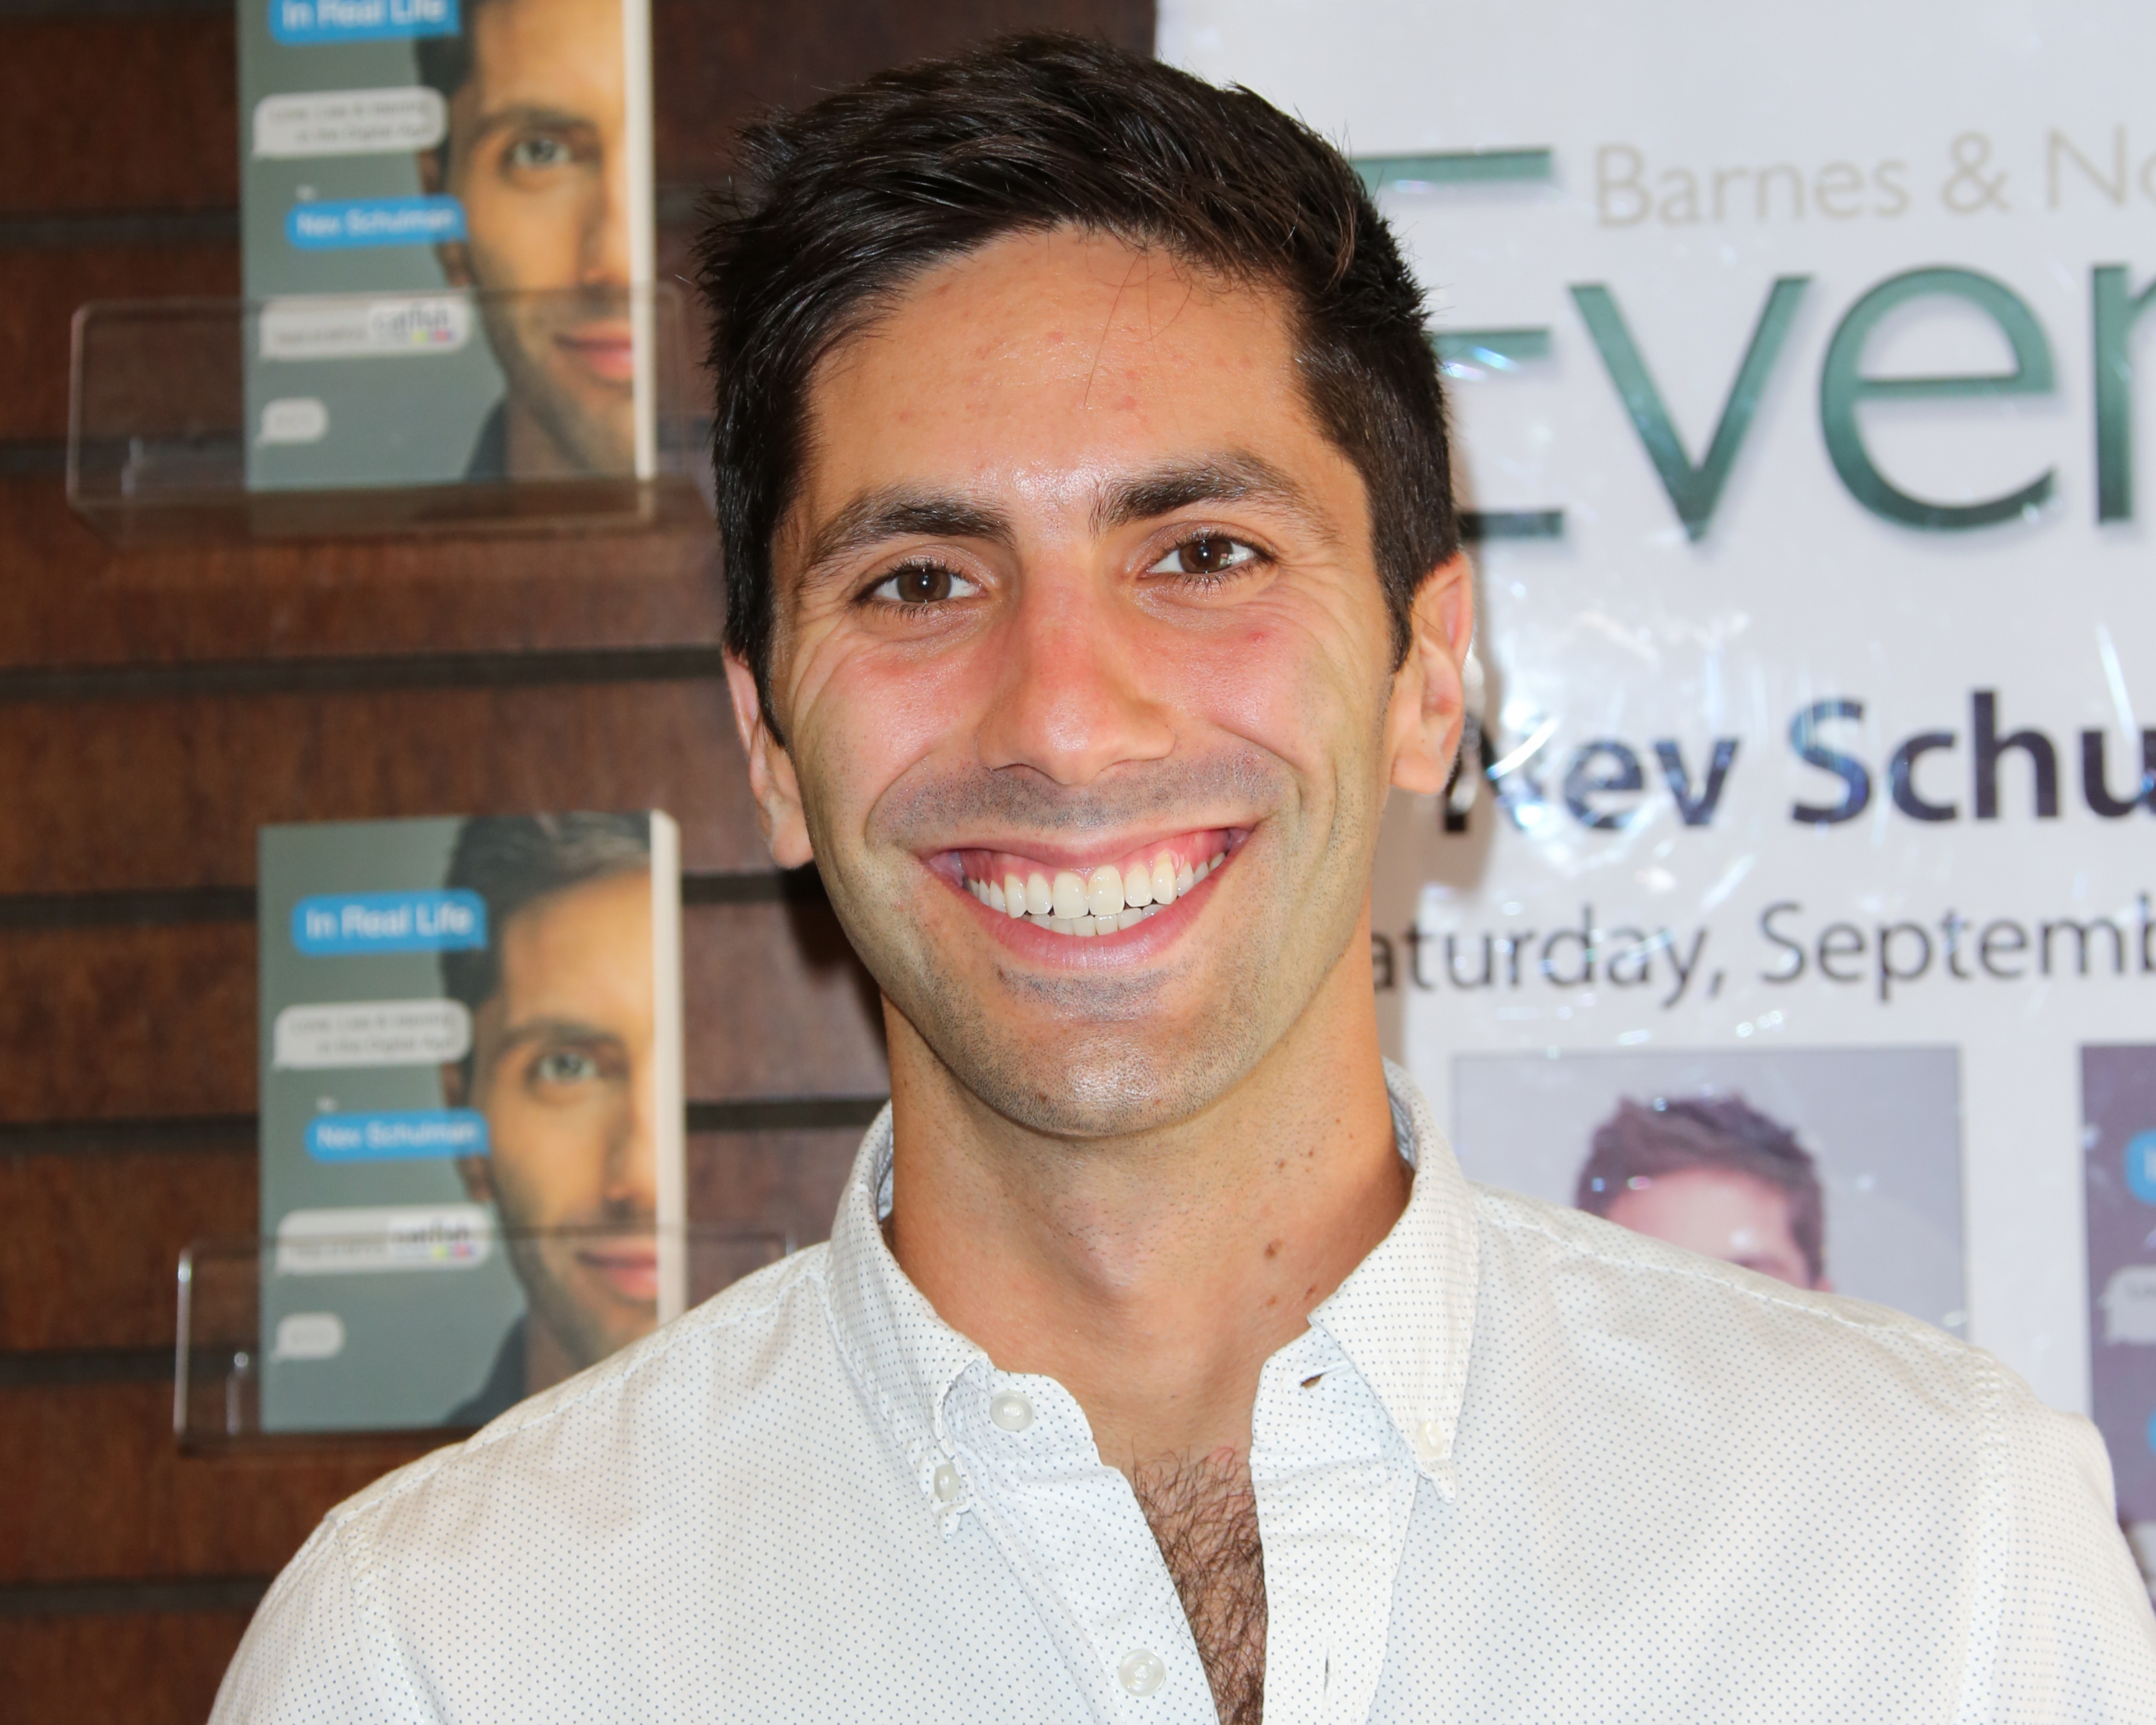 Nev Schulman at the signing of his new book "In Real Life" at Barnes & Noble bookstore, on September 6, 2014, in Los Angeles, California. | Source: Getty Images